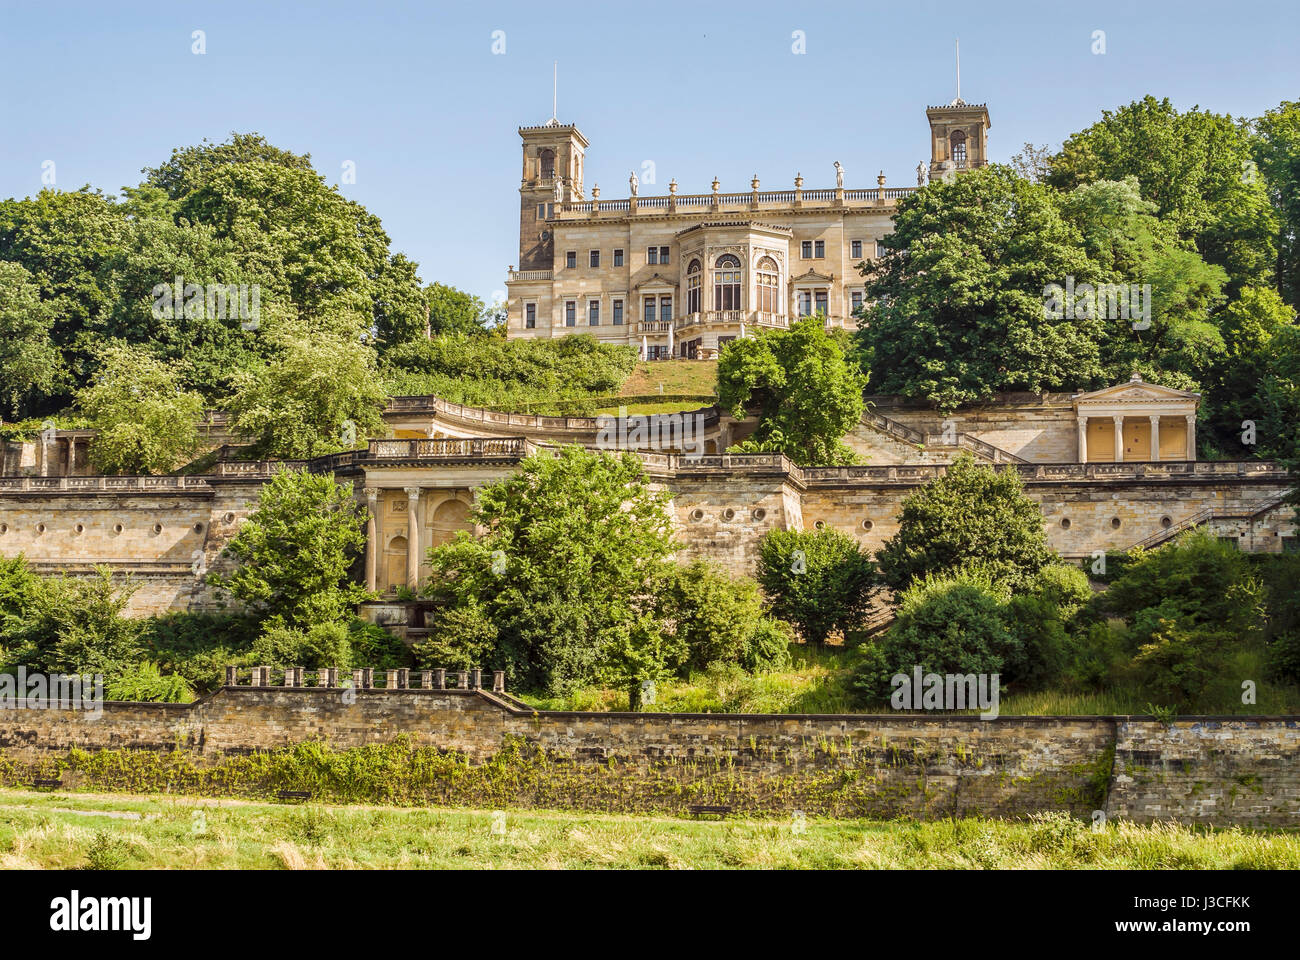 Schloss Albrechtsburg (castle) at the Dresden Elbe River Valley, Saxony, Germany Stock Photo